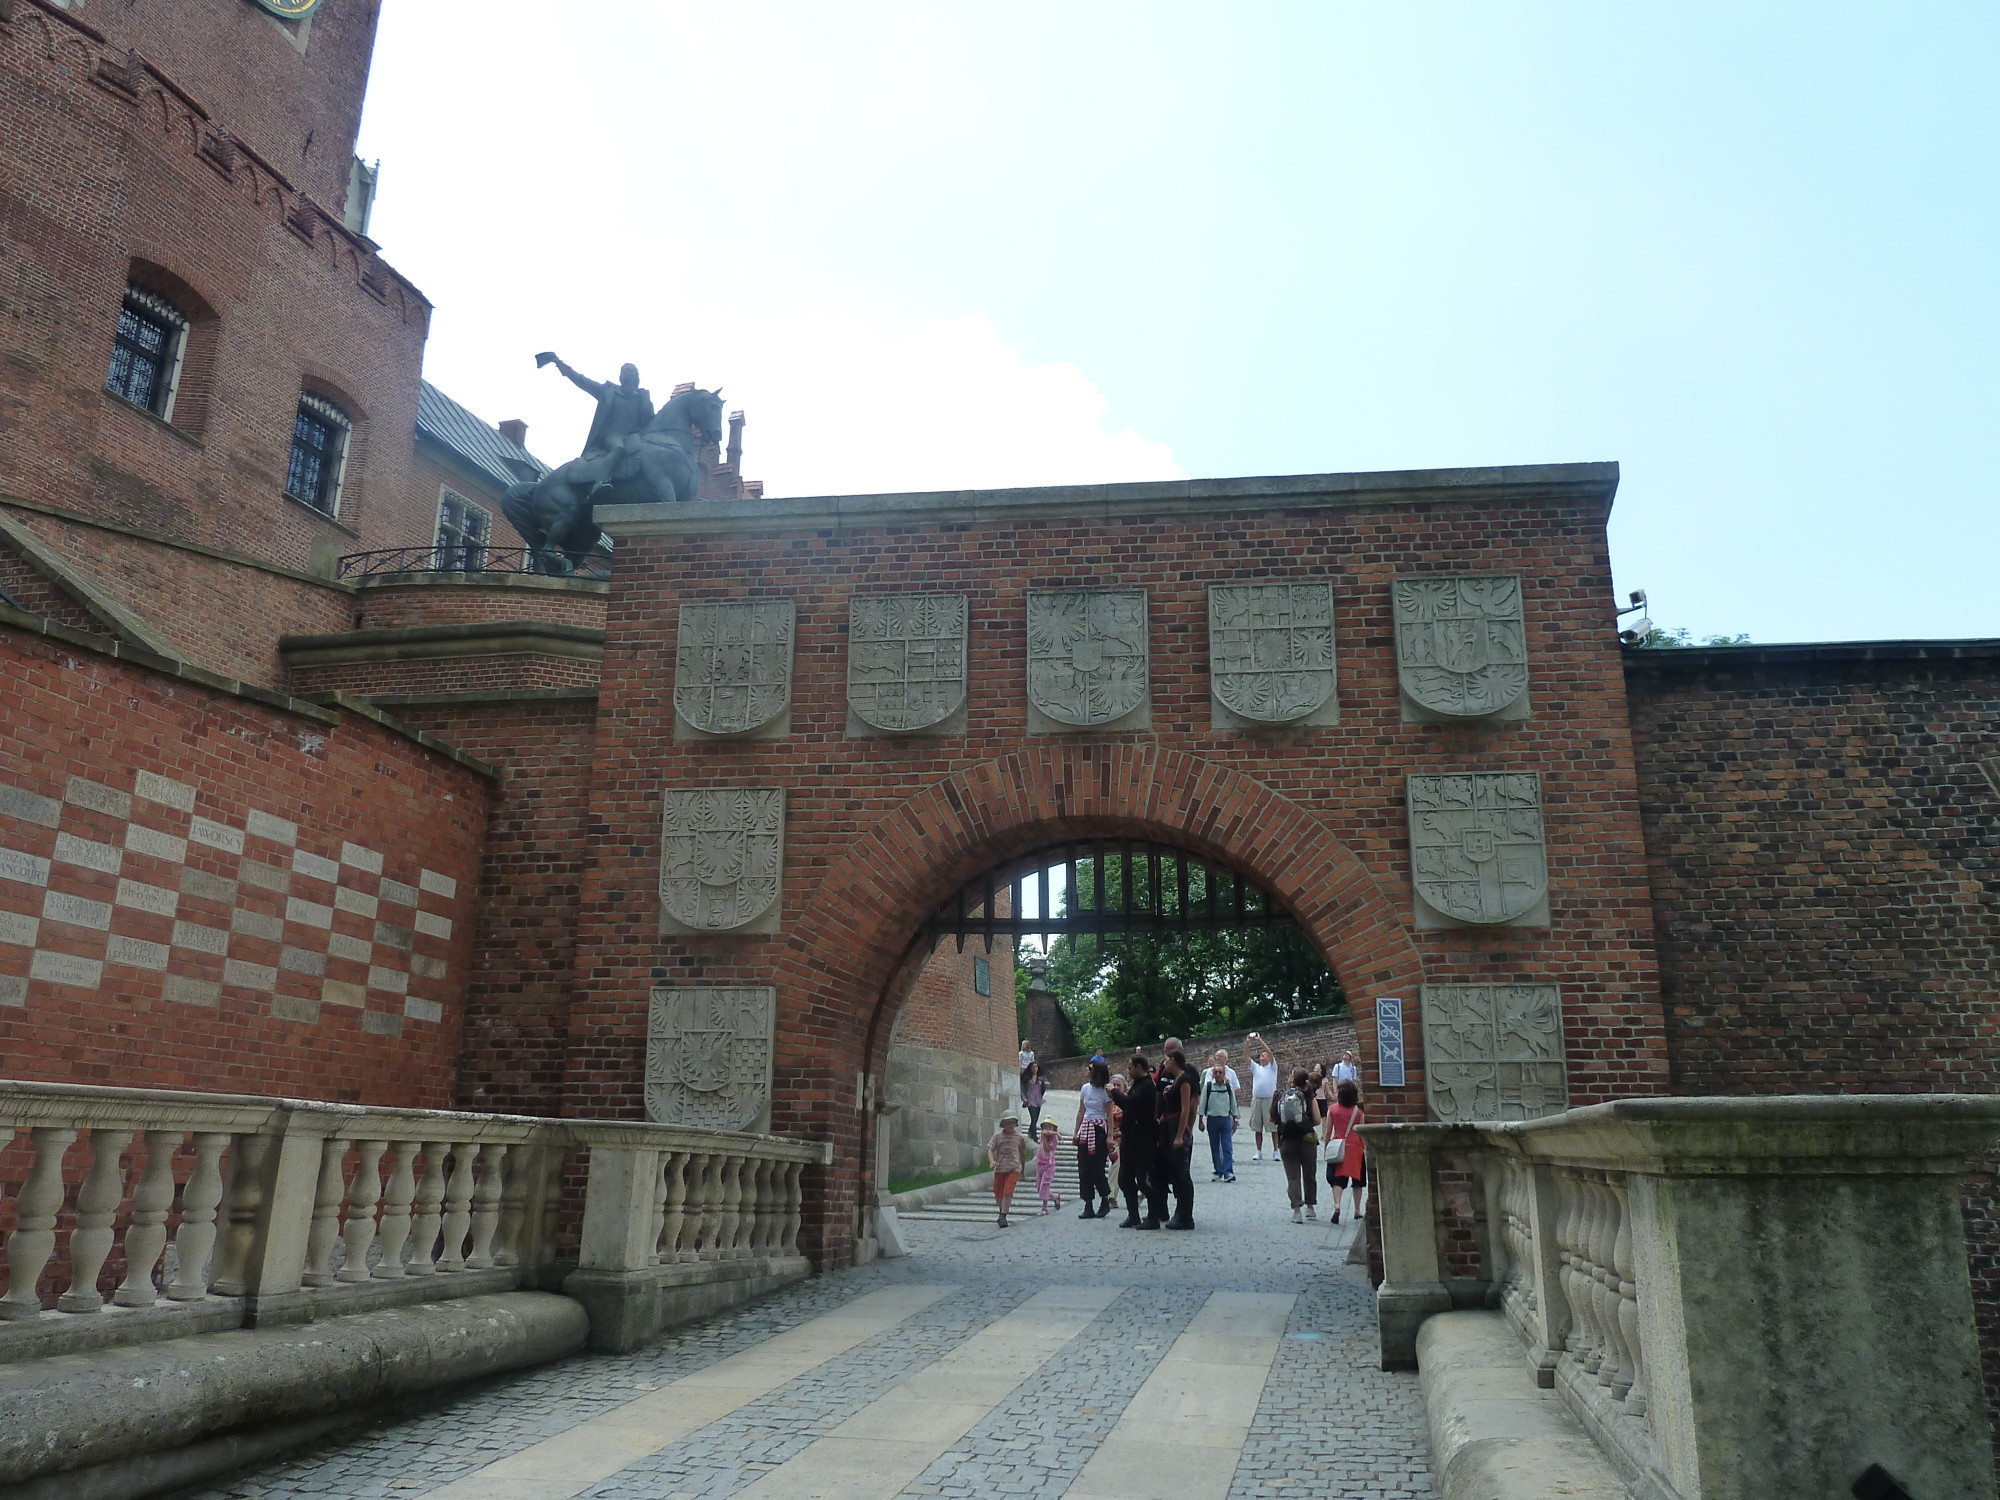 Brama Herbowa<br/>
Main gateway that leads to the Wawel Castle.decorated with coats of arms